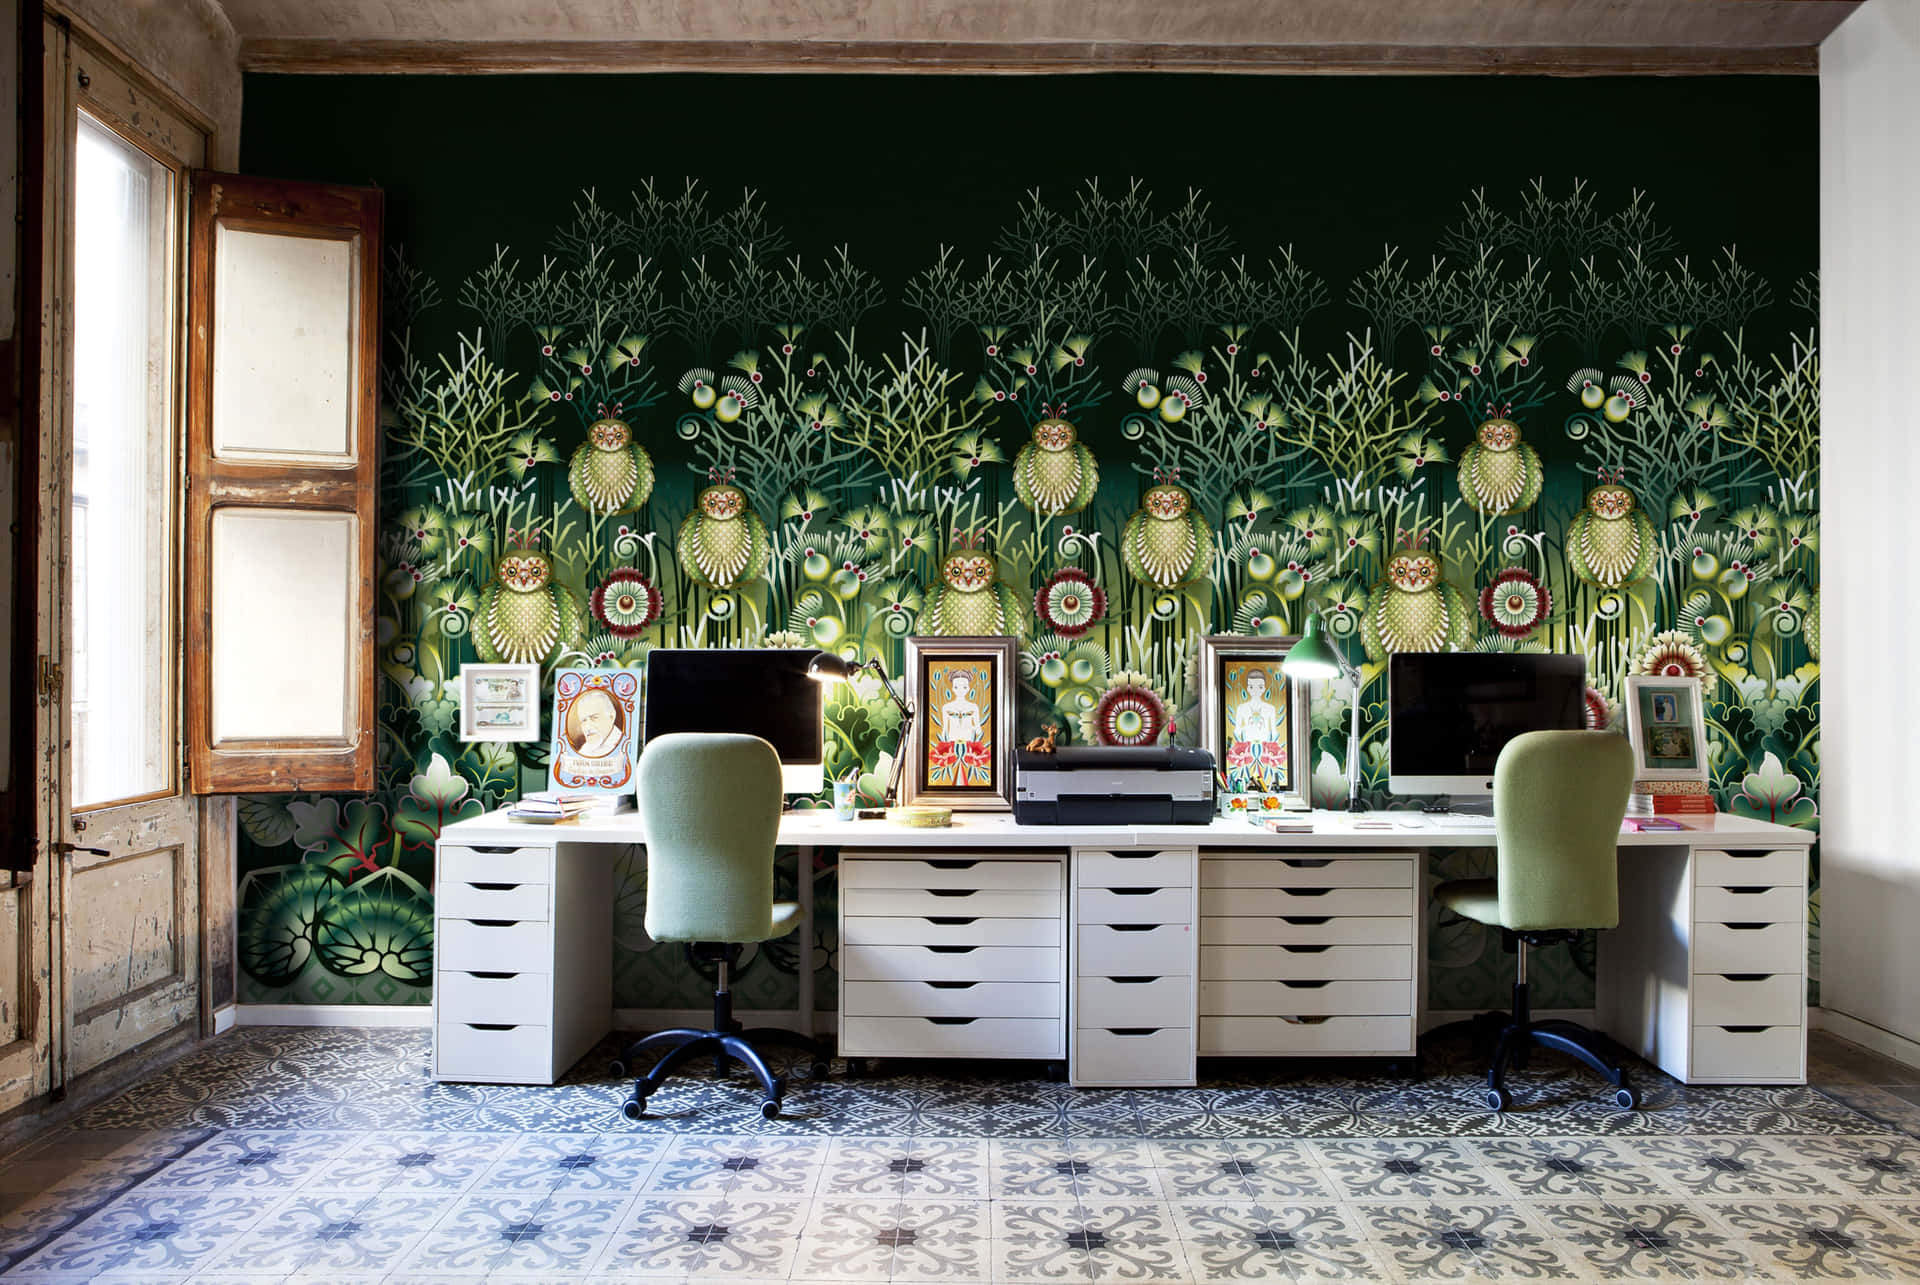 Our Home Office Wallpaper Reveal  Chrissy Marie Blog